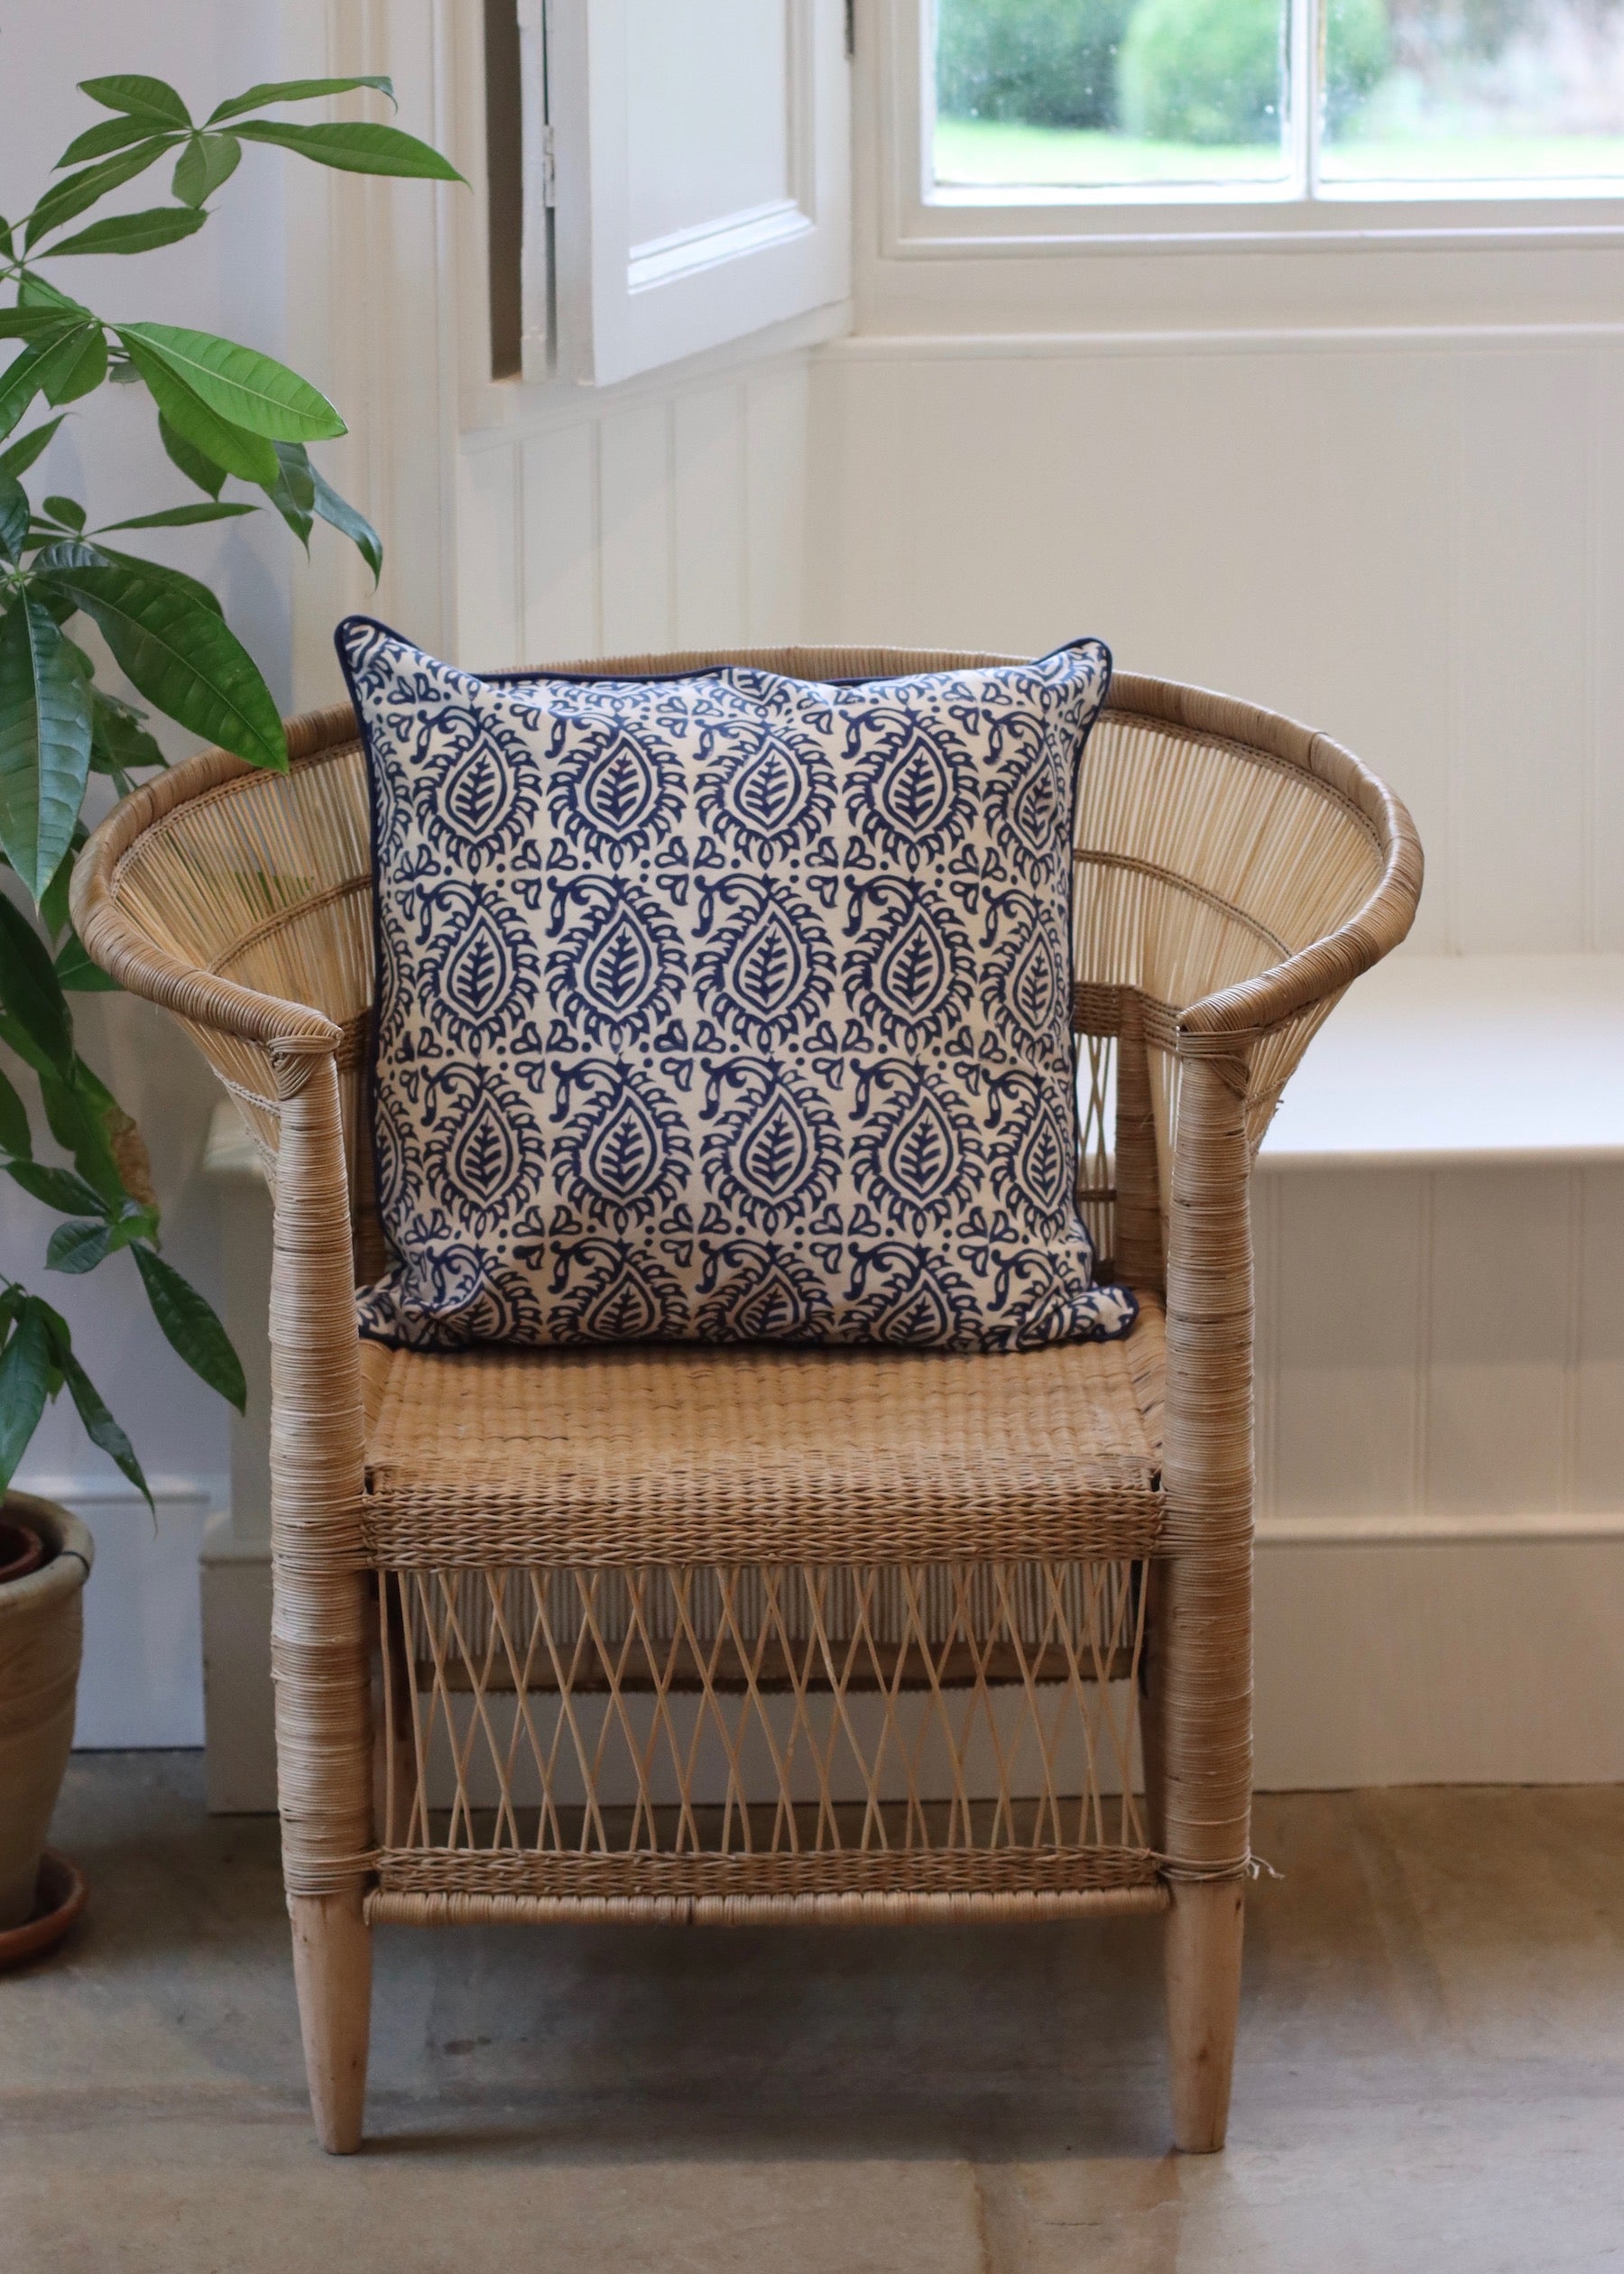 Block Print Cushion Cover - White and Navy Leaf